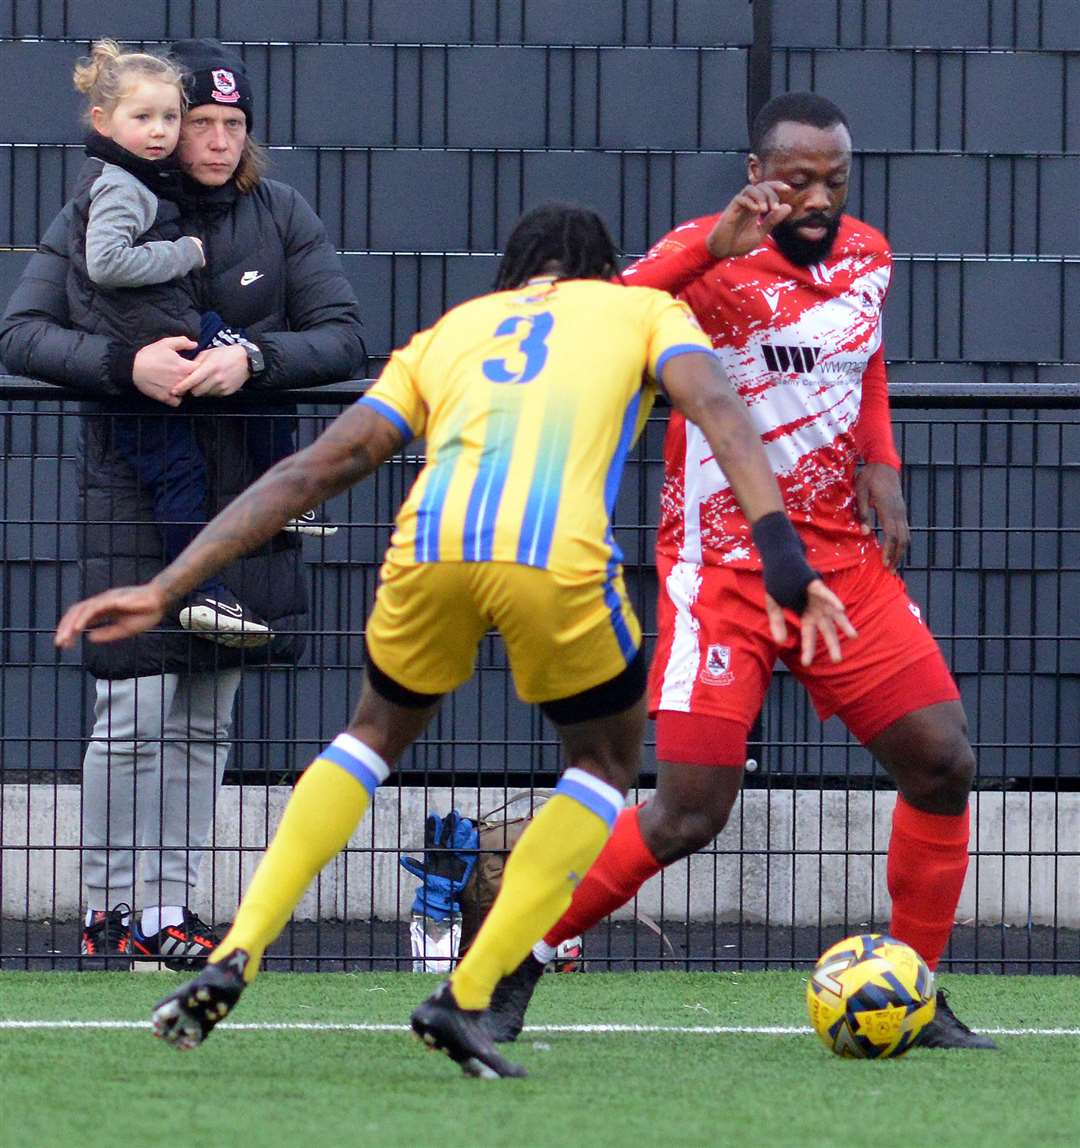 Ramsgate drew 1-1 with Sittingbourne last weekend. Picture: Randolph File